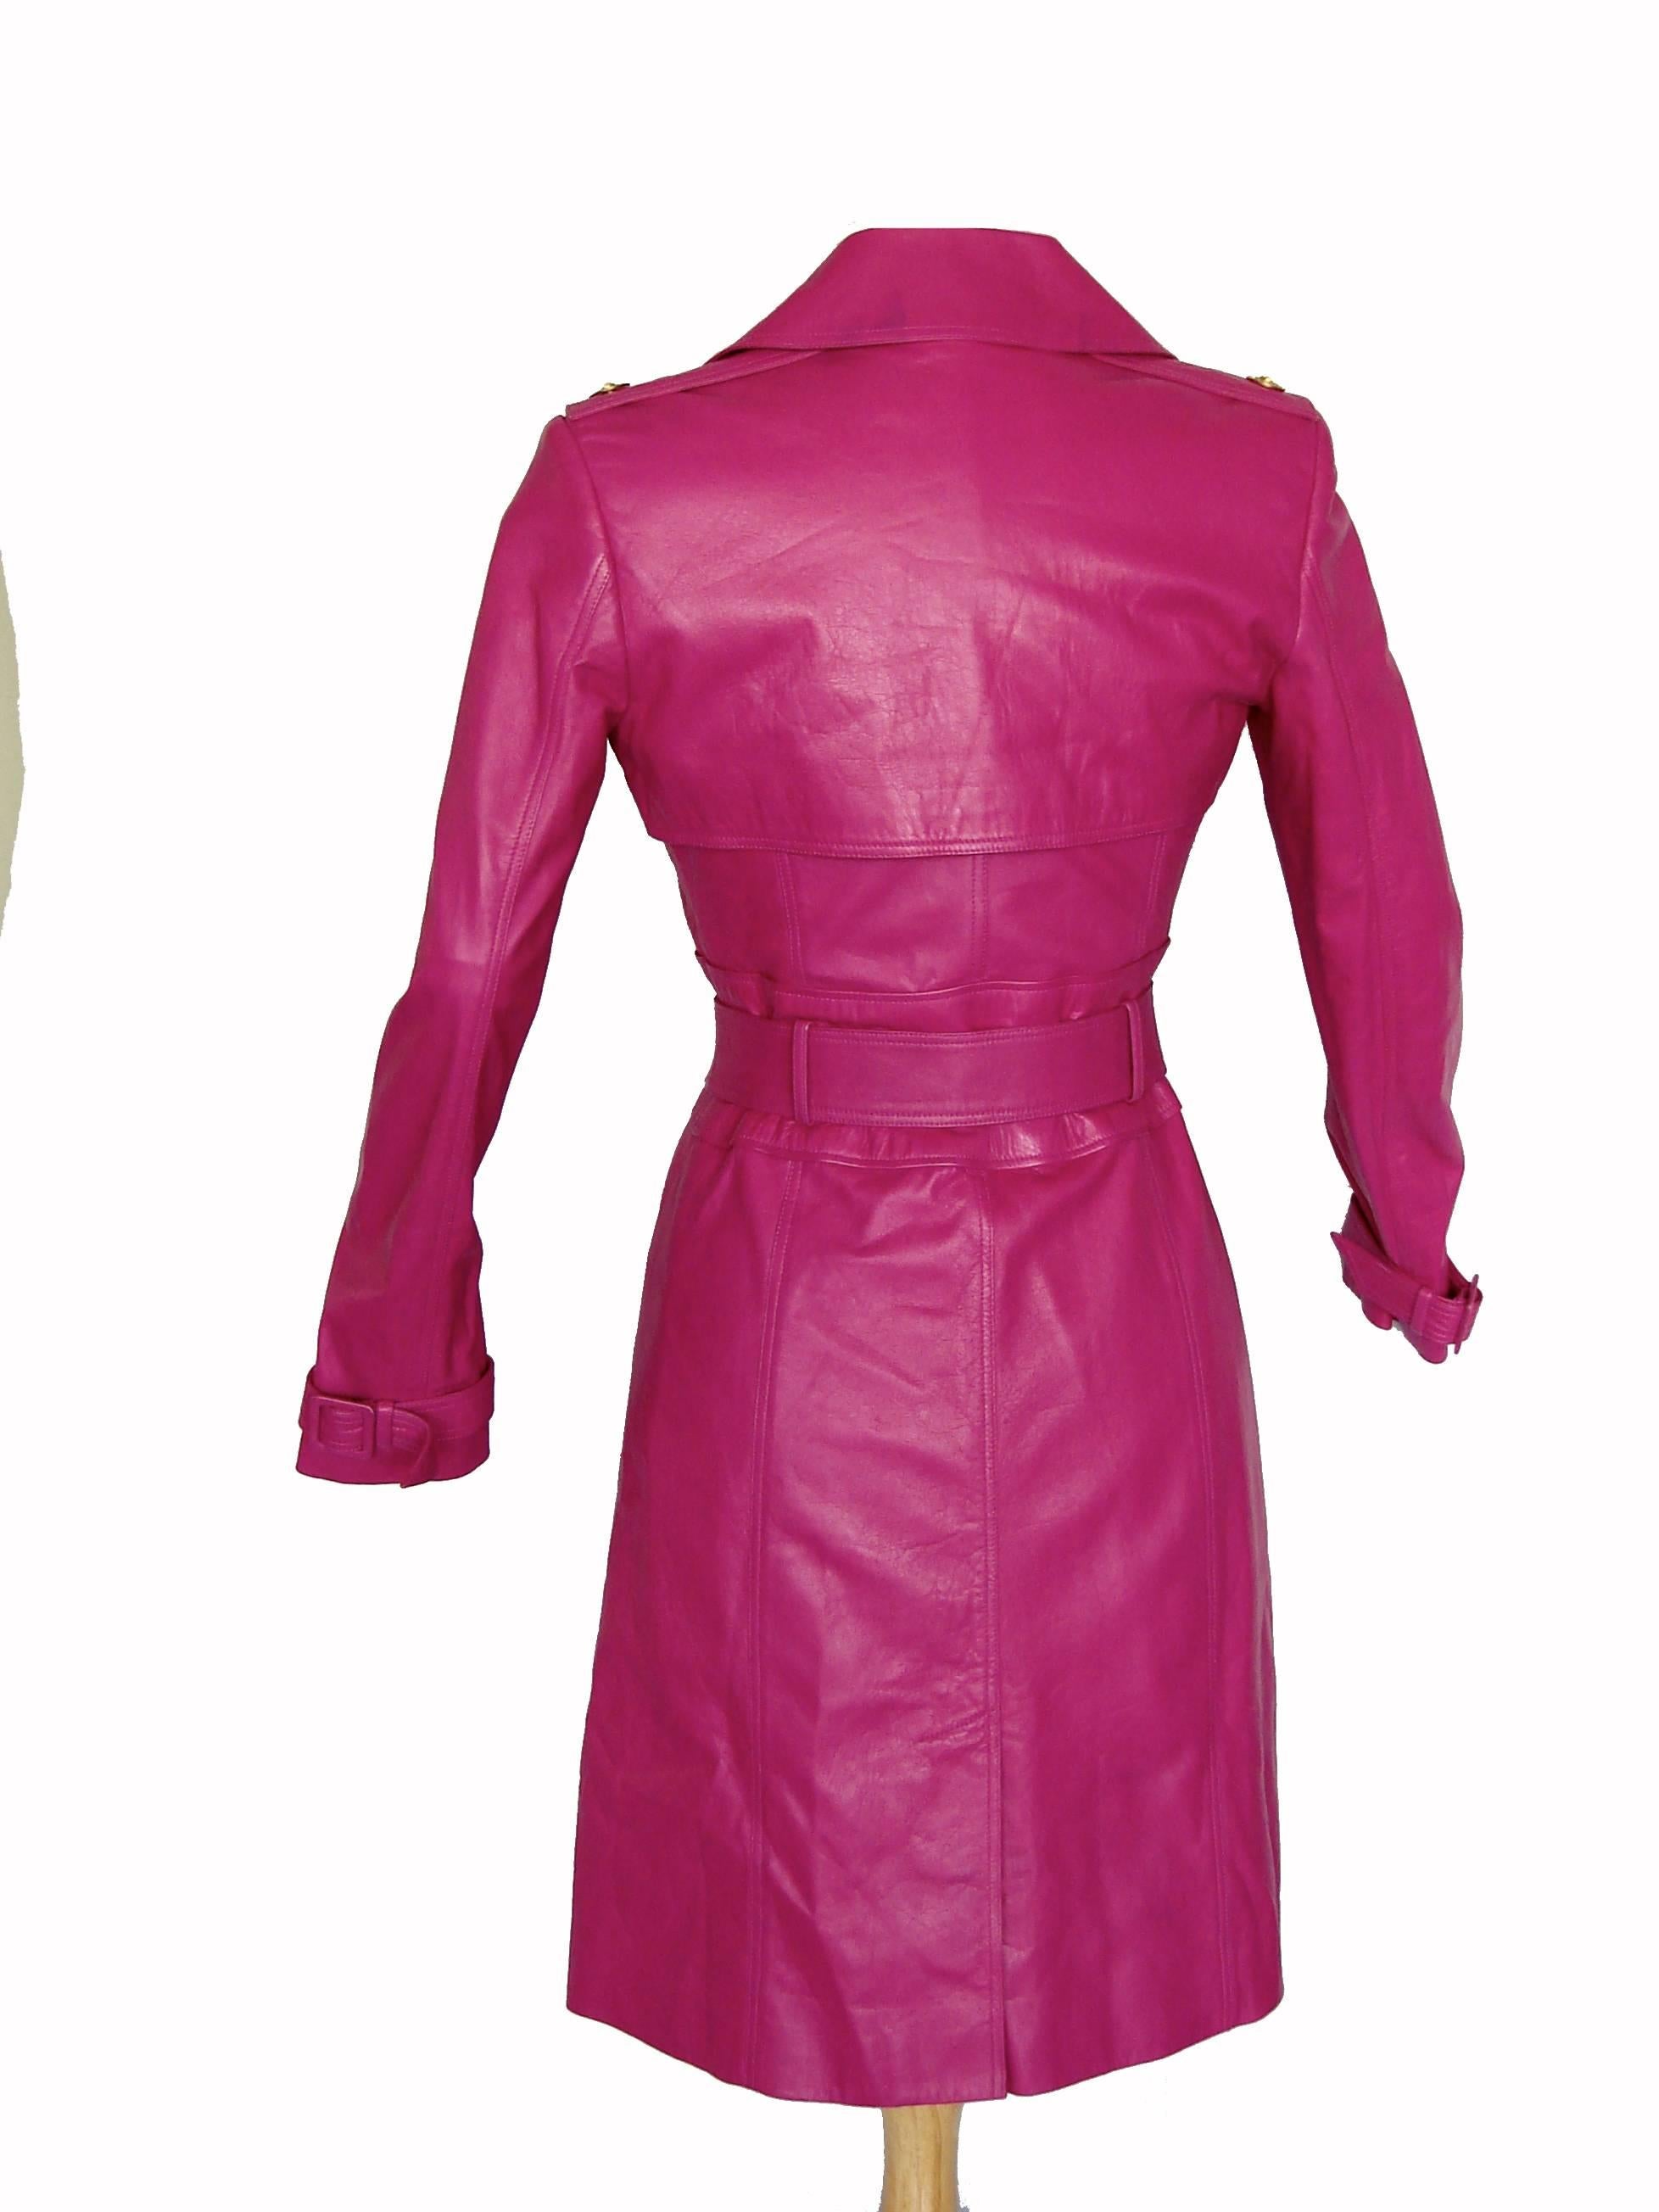 This brilliant magenta leather coat was made by Versace in 2011.  Made from an incredibly soft lambskin leather, it features four gold metal Medusa buttons to fasten in front, a tie-wrap belt, epaulets and a storm flap on the back.  Fully lined in